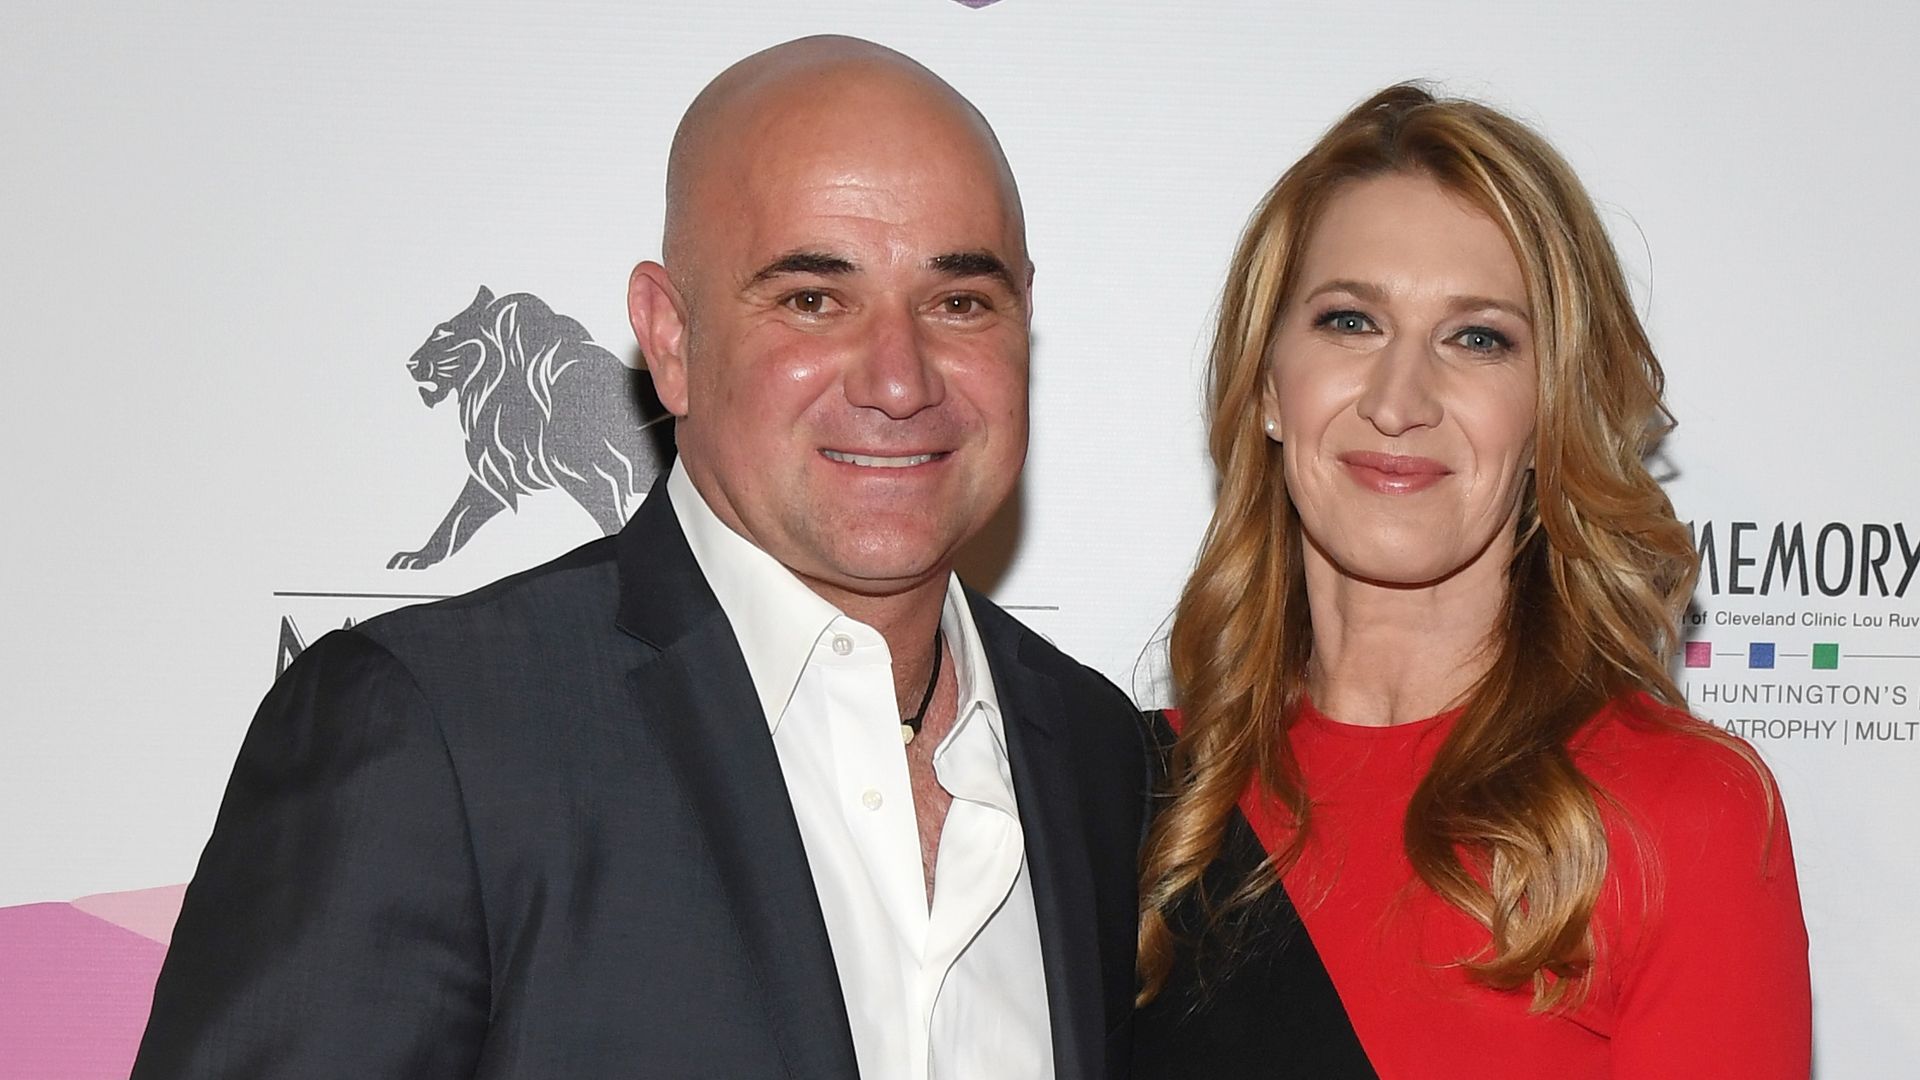 Andre Agassi standing with Steffi Graf